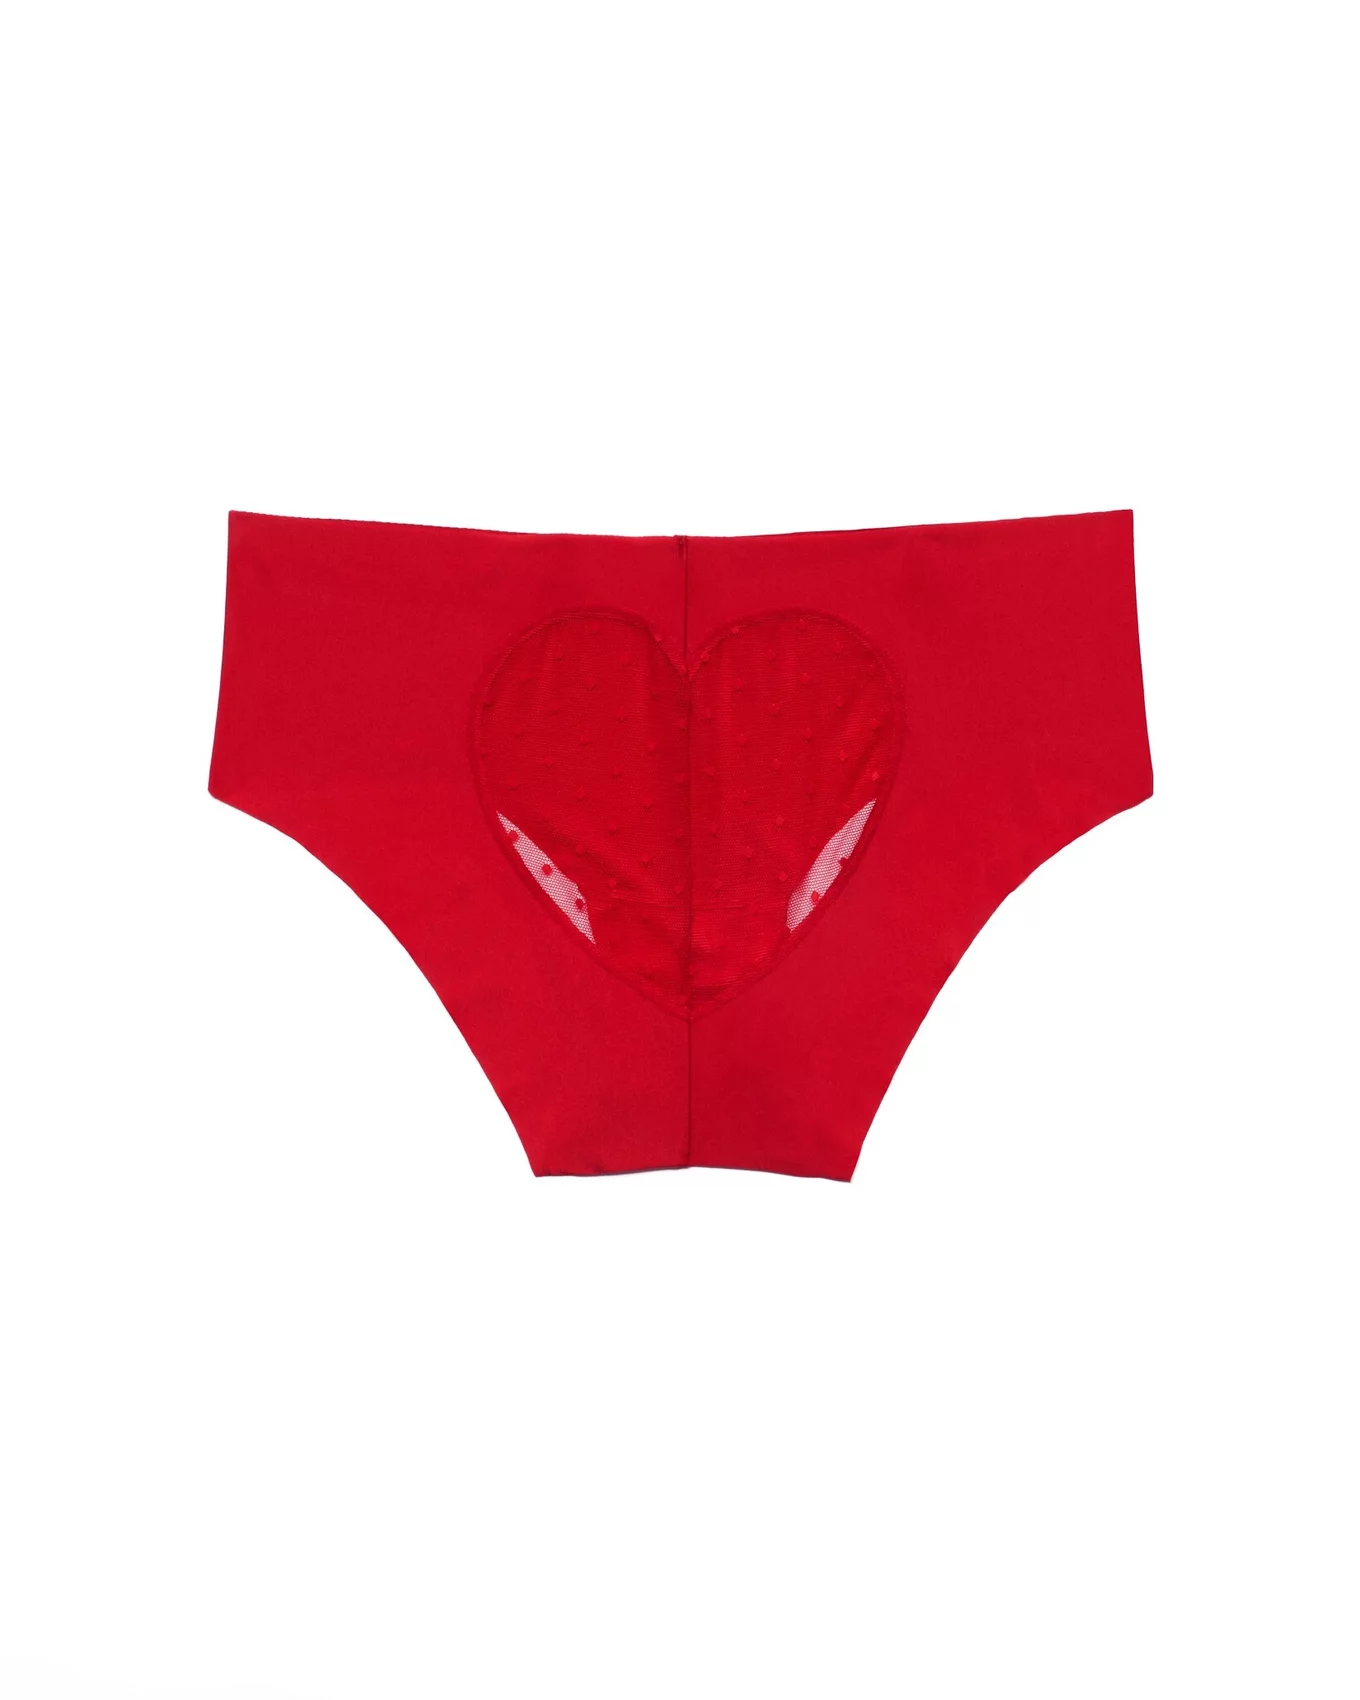 Buy Custom Ladies Cheeky High Waist Underwear Love Heart Printed High-Cut  Photo on Panty Sexy Briefs Gift for Women at